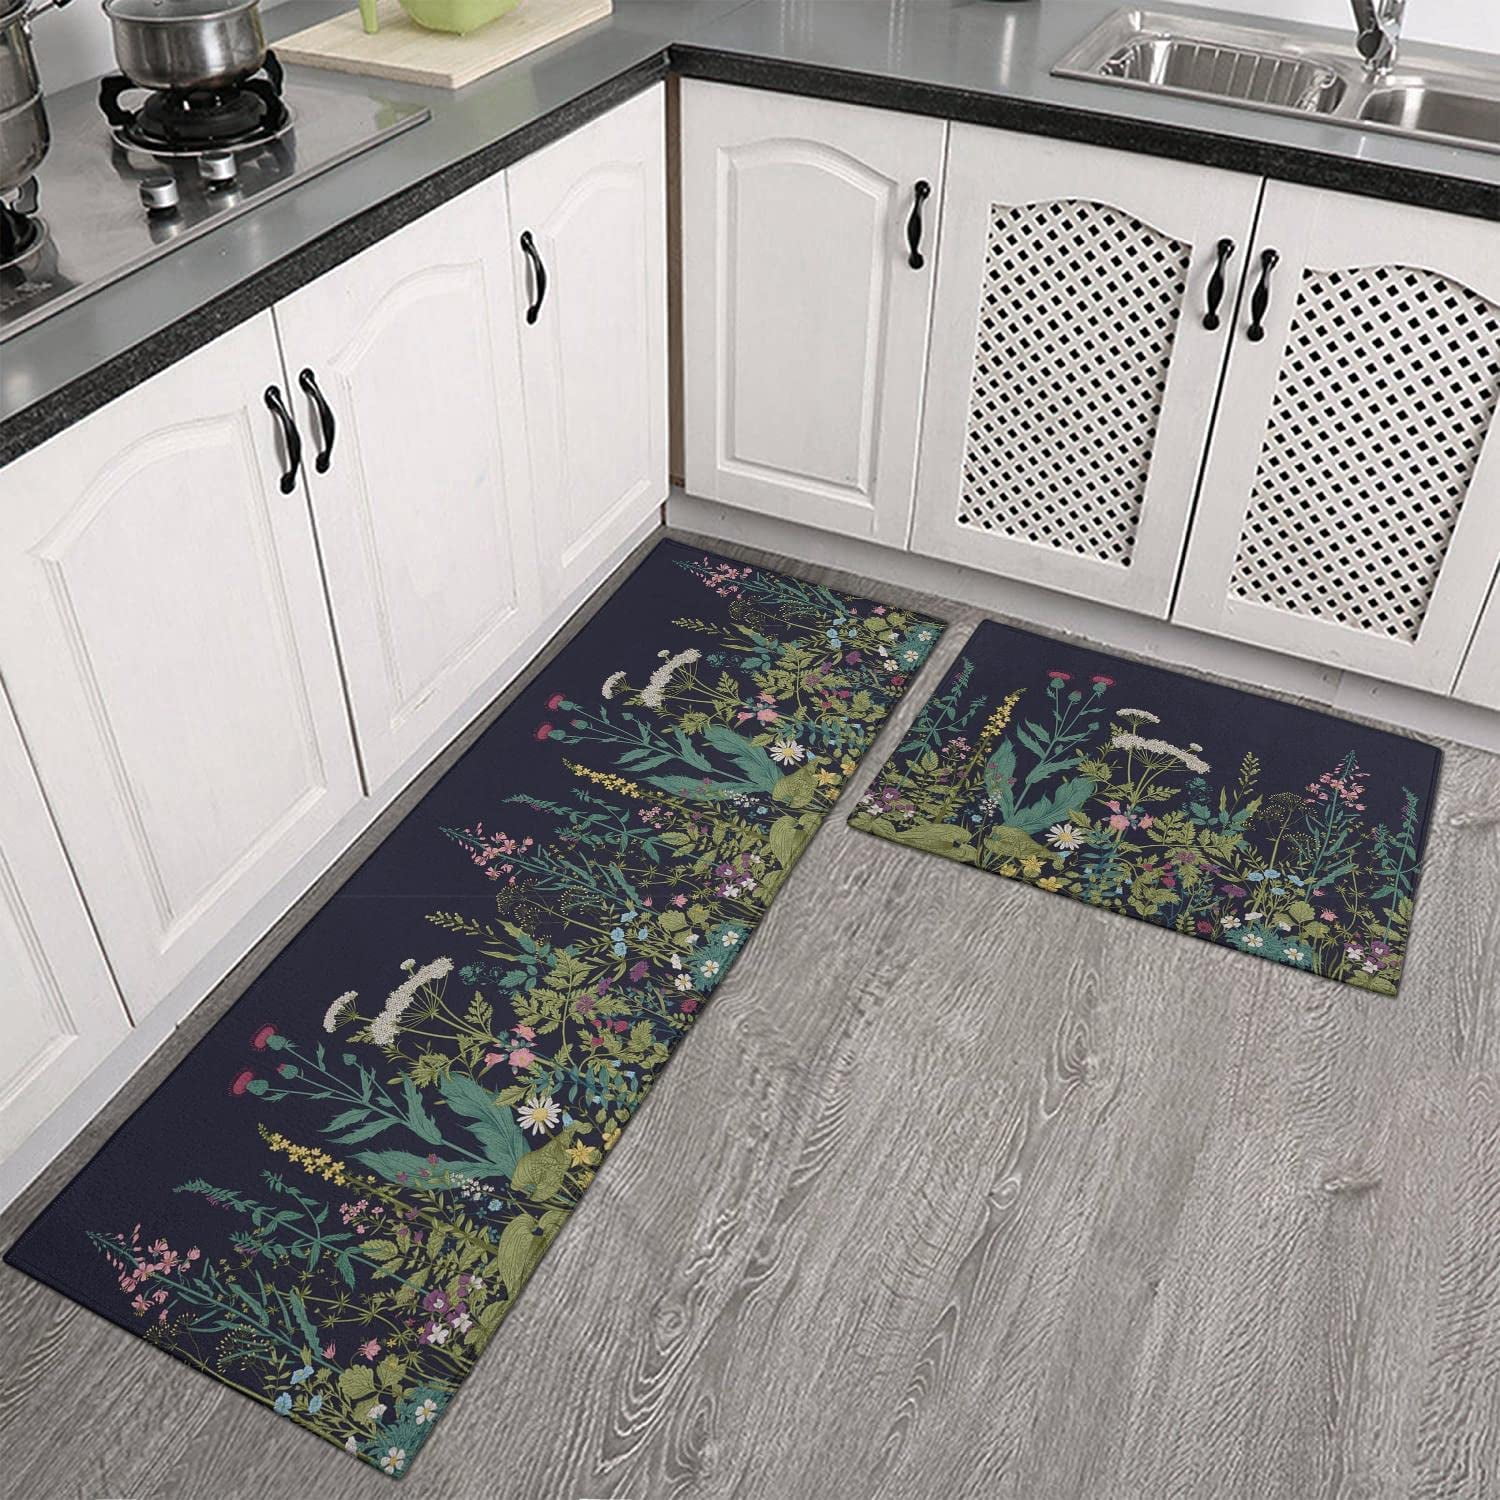 Fat Chef Kitchen Rugs and Mats Non Skid Washable Chef Kitchen Mats  Cushioned Anti Fatigue for in Front of Sink and Bathroom Carpet Doormat 39  X 20